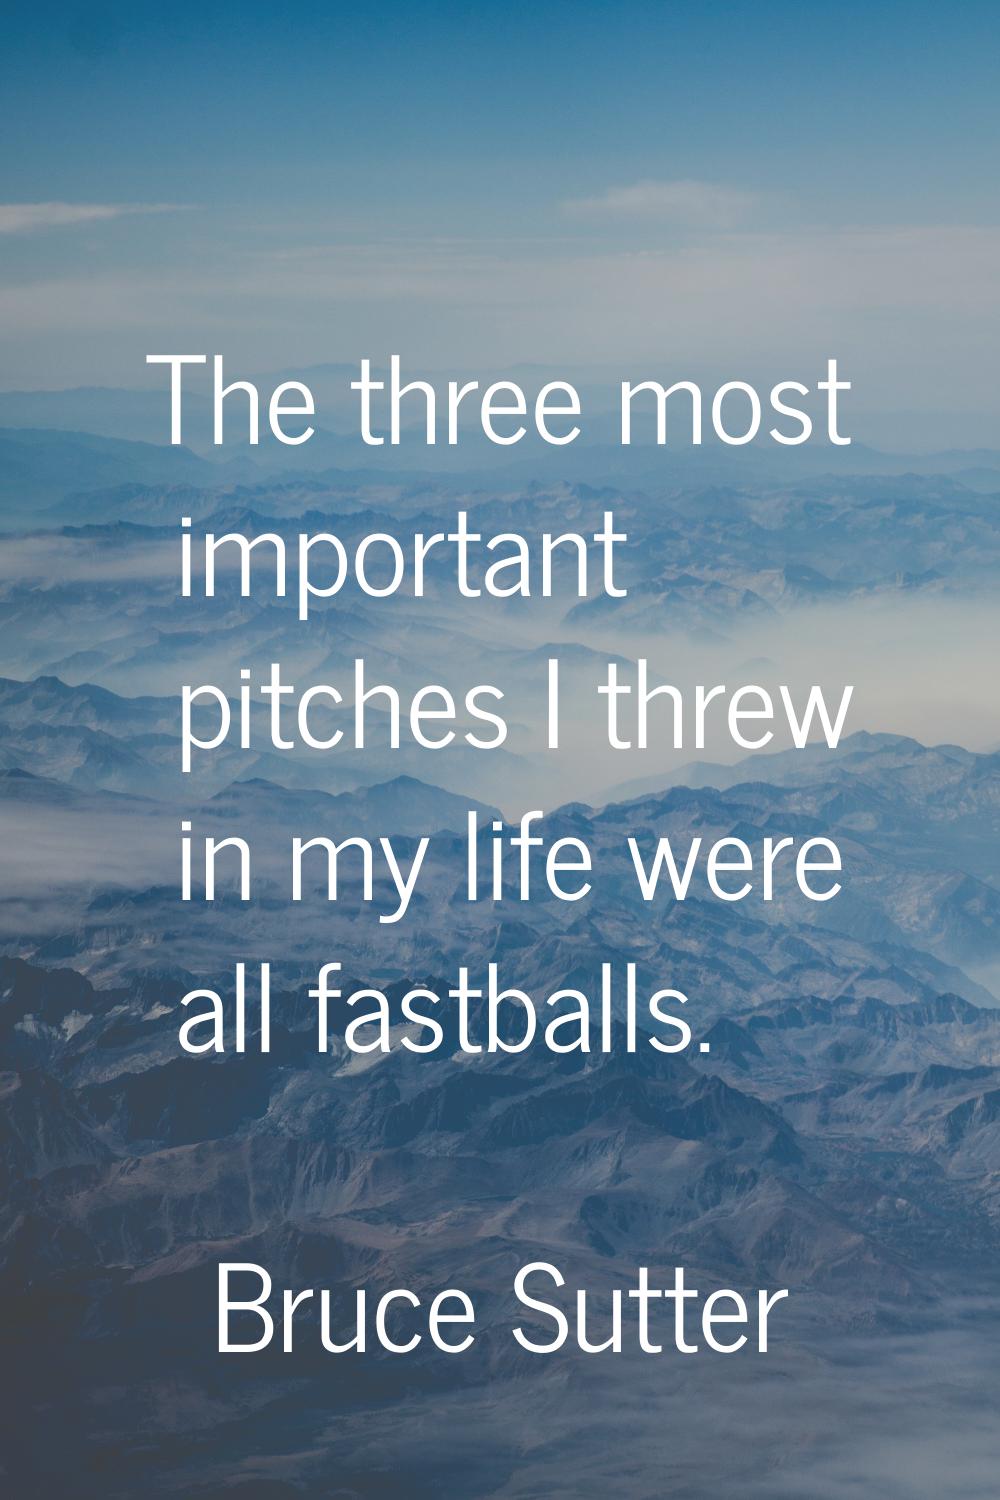 The three most important pitches I threw in my life were all fastballs.